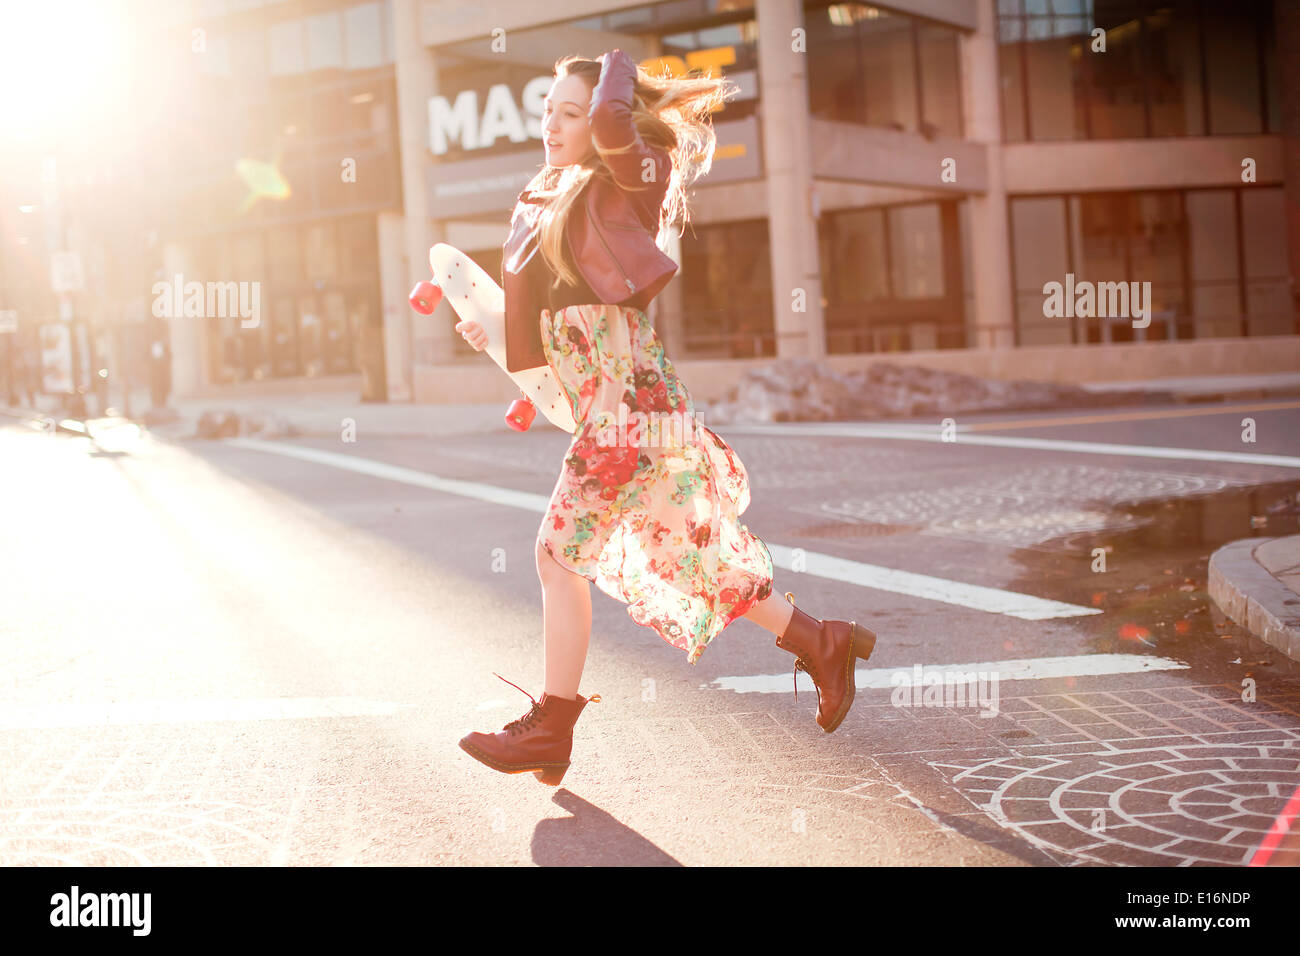 Young adult woman running, Boston, Massachusetts, USA Banque D'Images